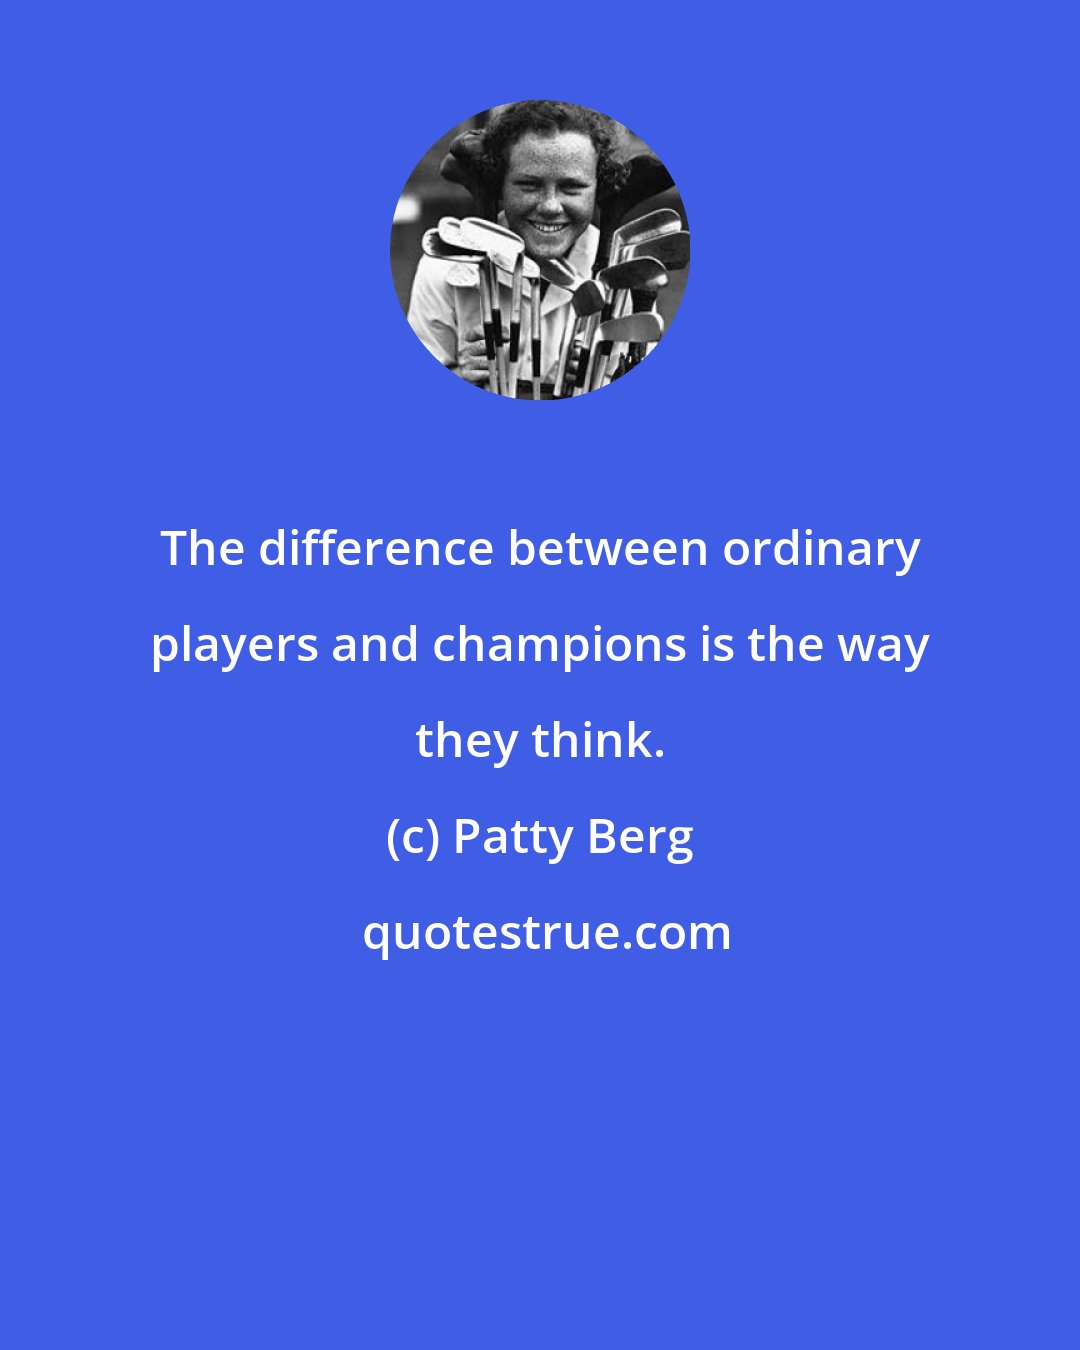 Patty Berg: The difference between ordinary players and champions is the way they think.